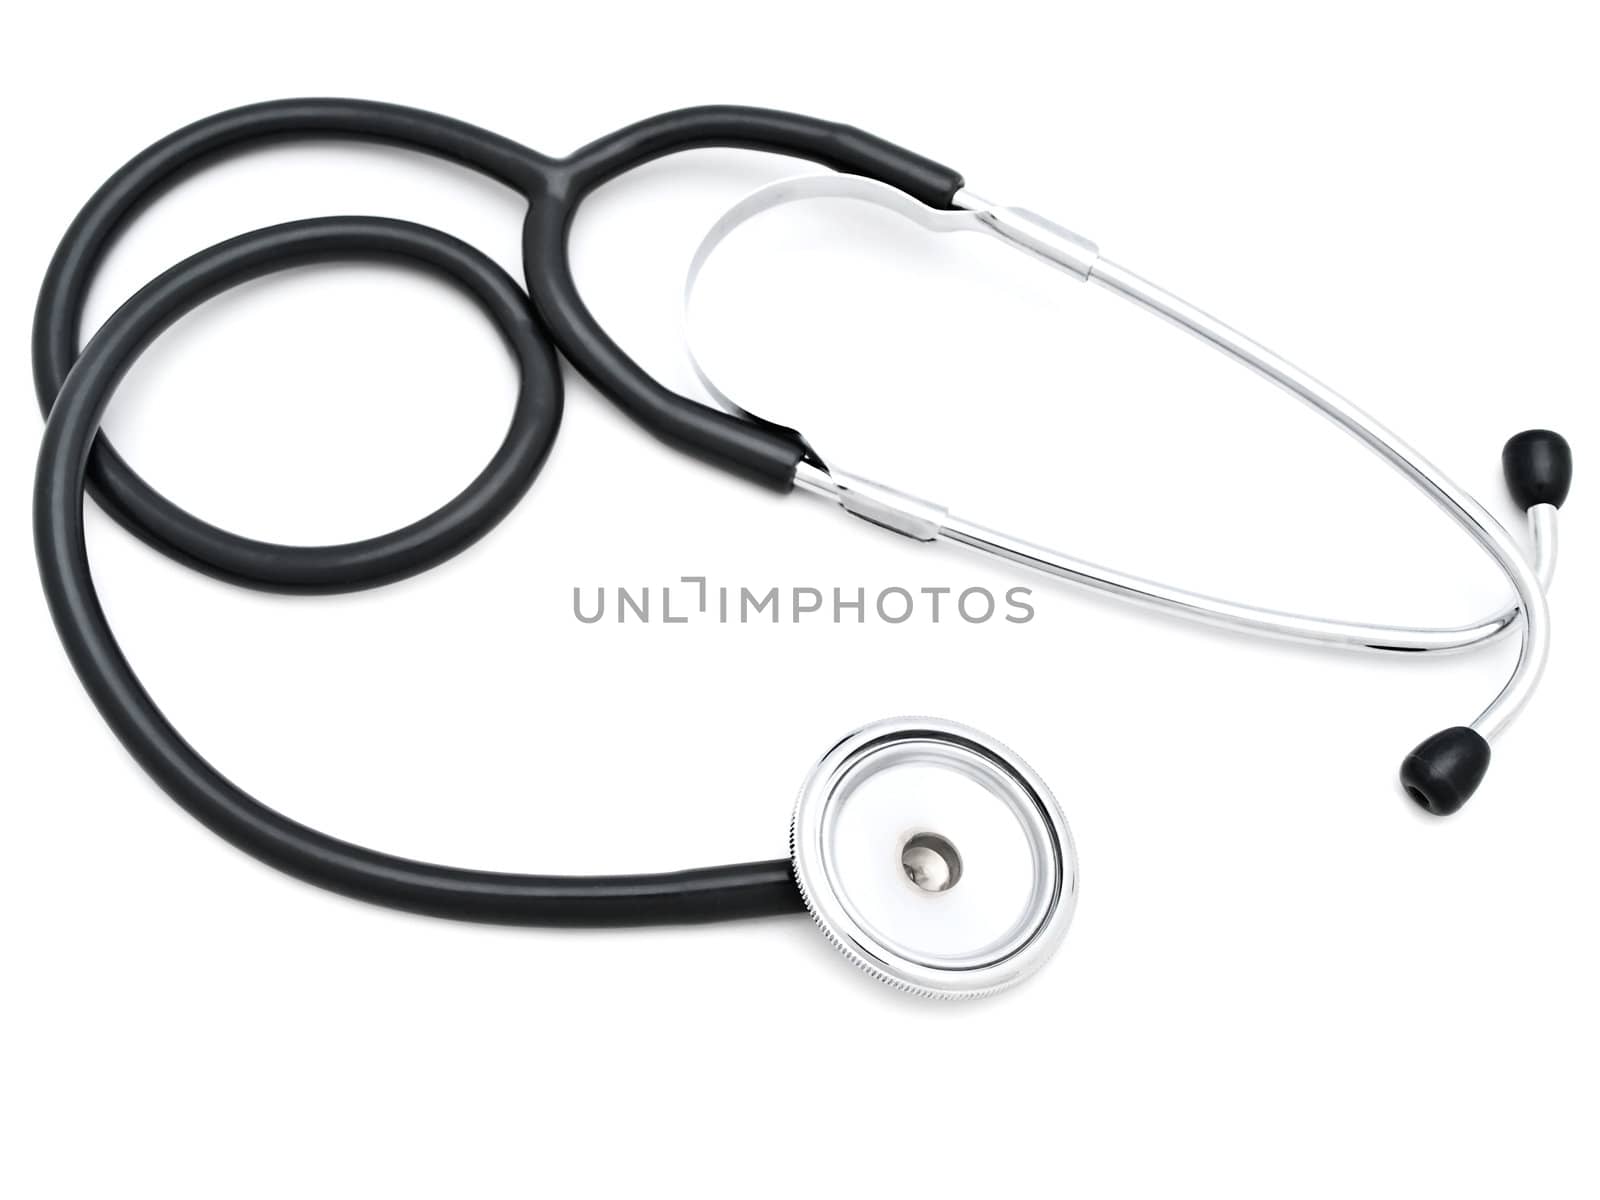 stethoscope by SNR